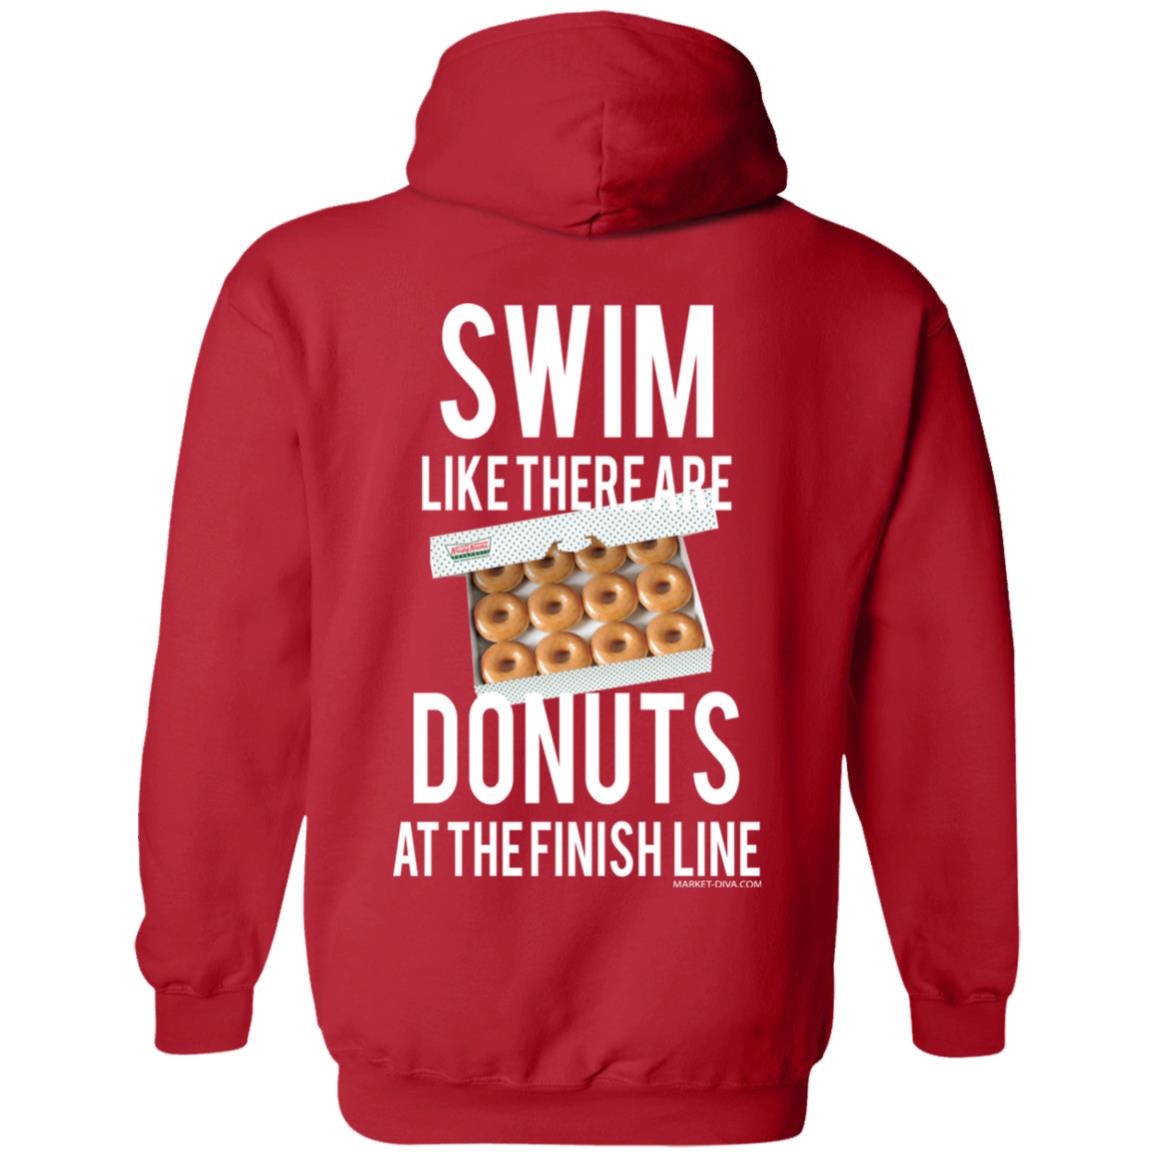 Hoodie: Donuts at Finish Line